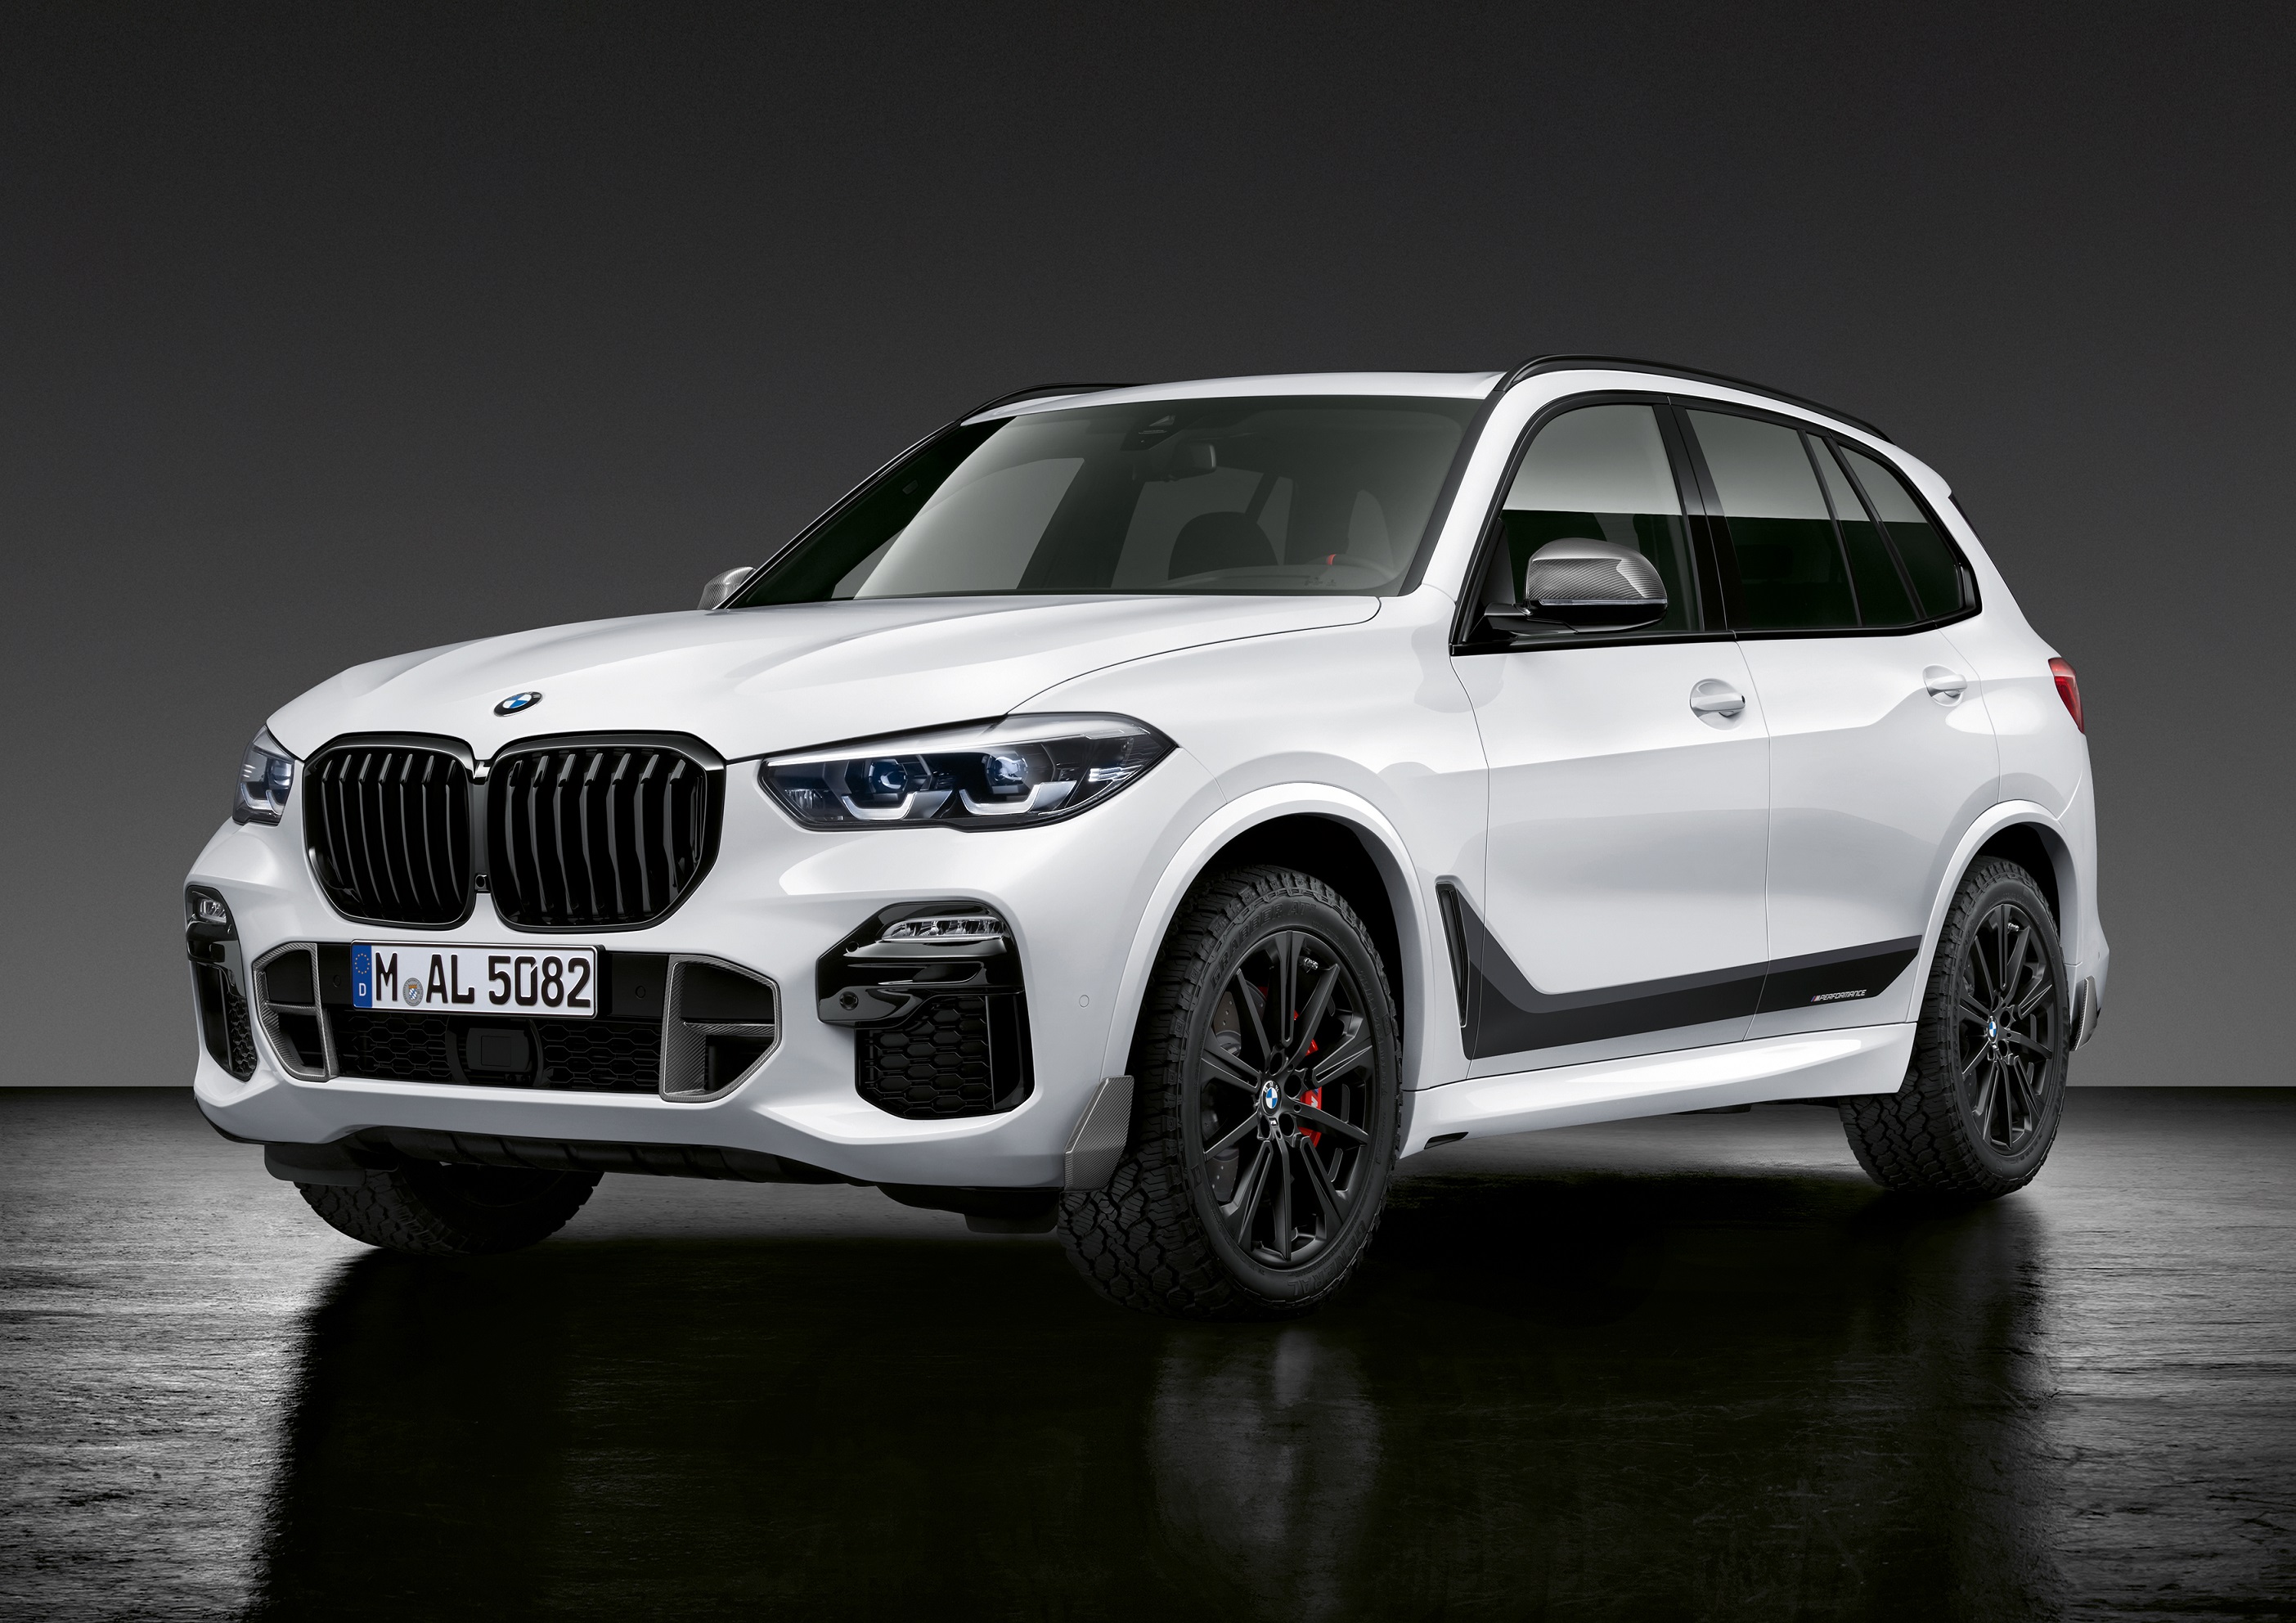 'The Boss' gets electrified with the new BMW X5 xDrive45e M Sport